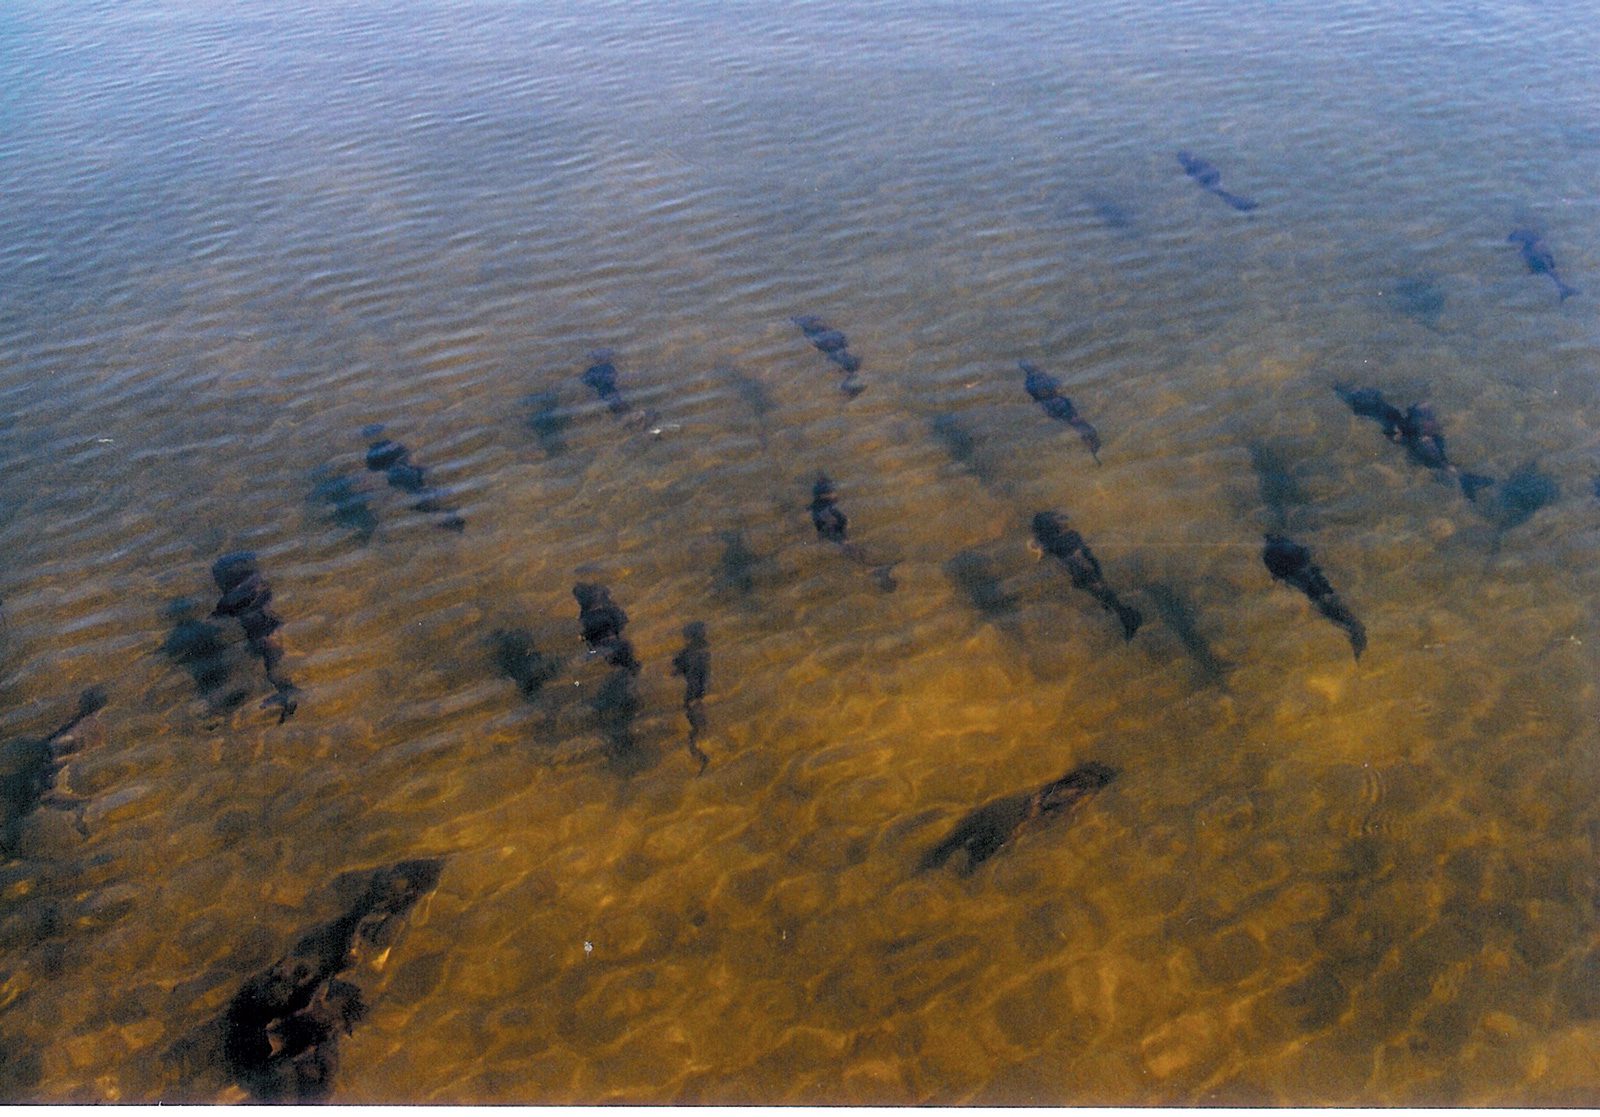 cluster of fish in shallow water